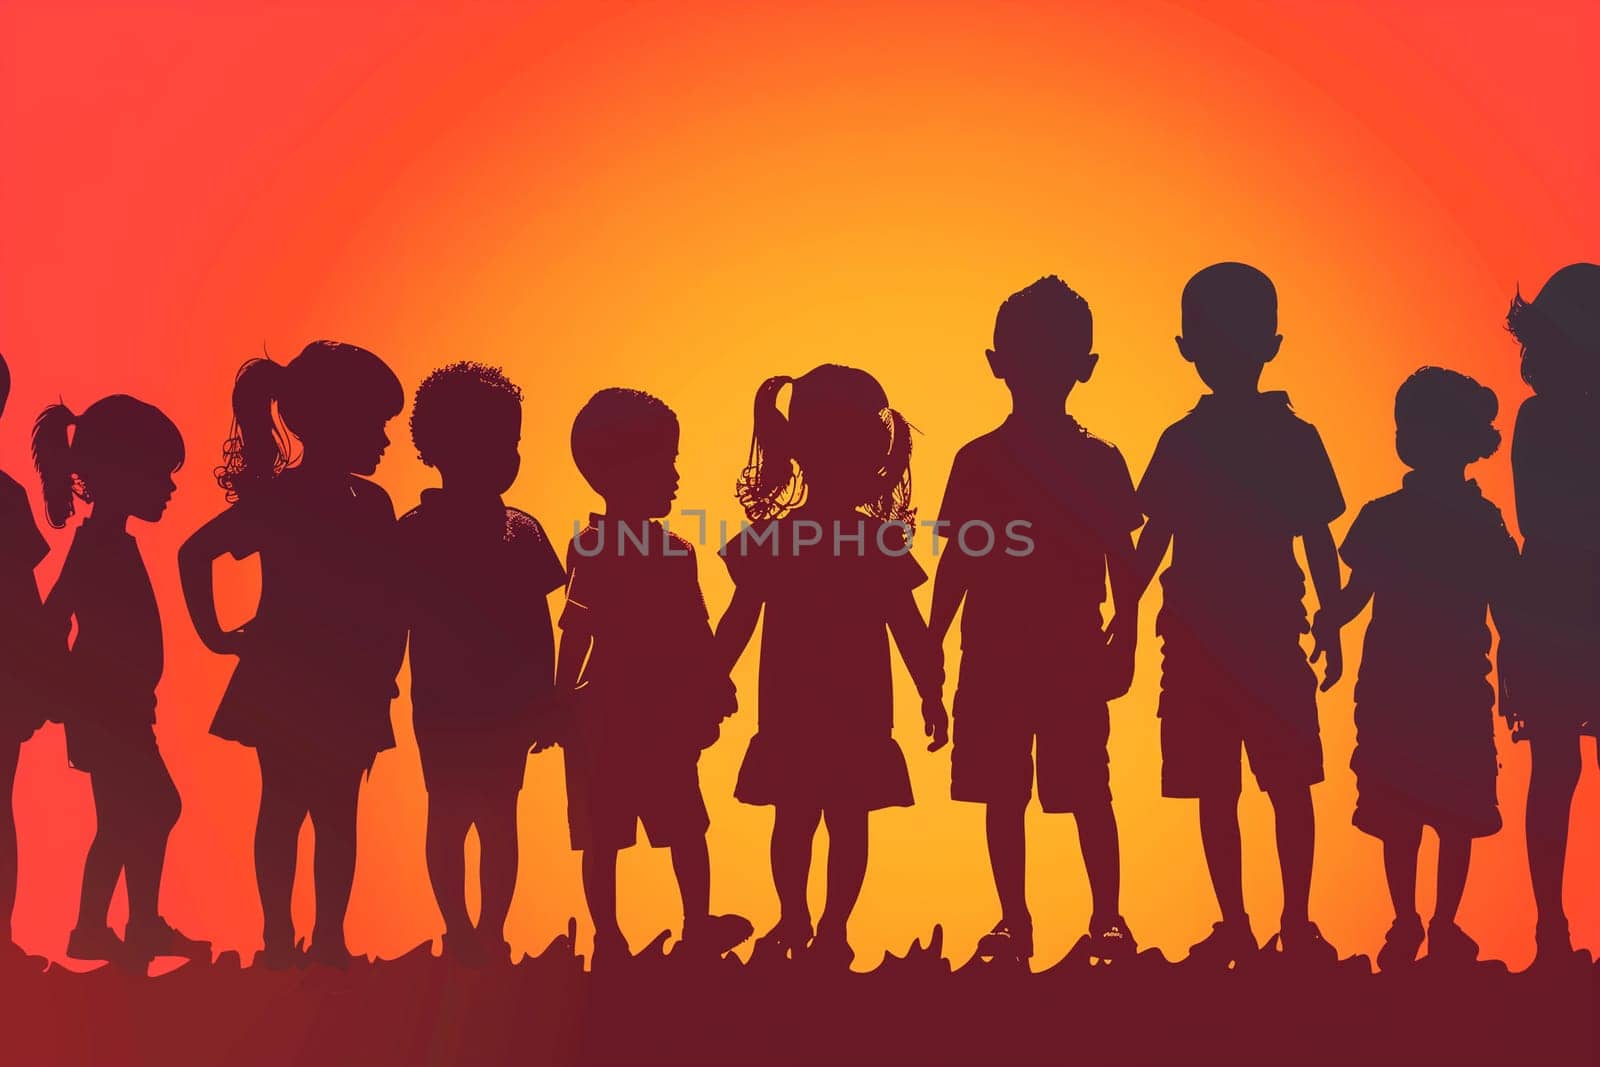 Silhouettes of children holding hands in a line, standing in front of a vibrant orange sunset.